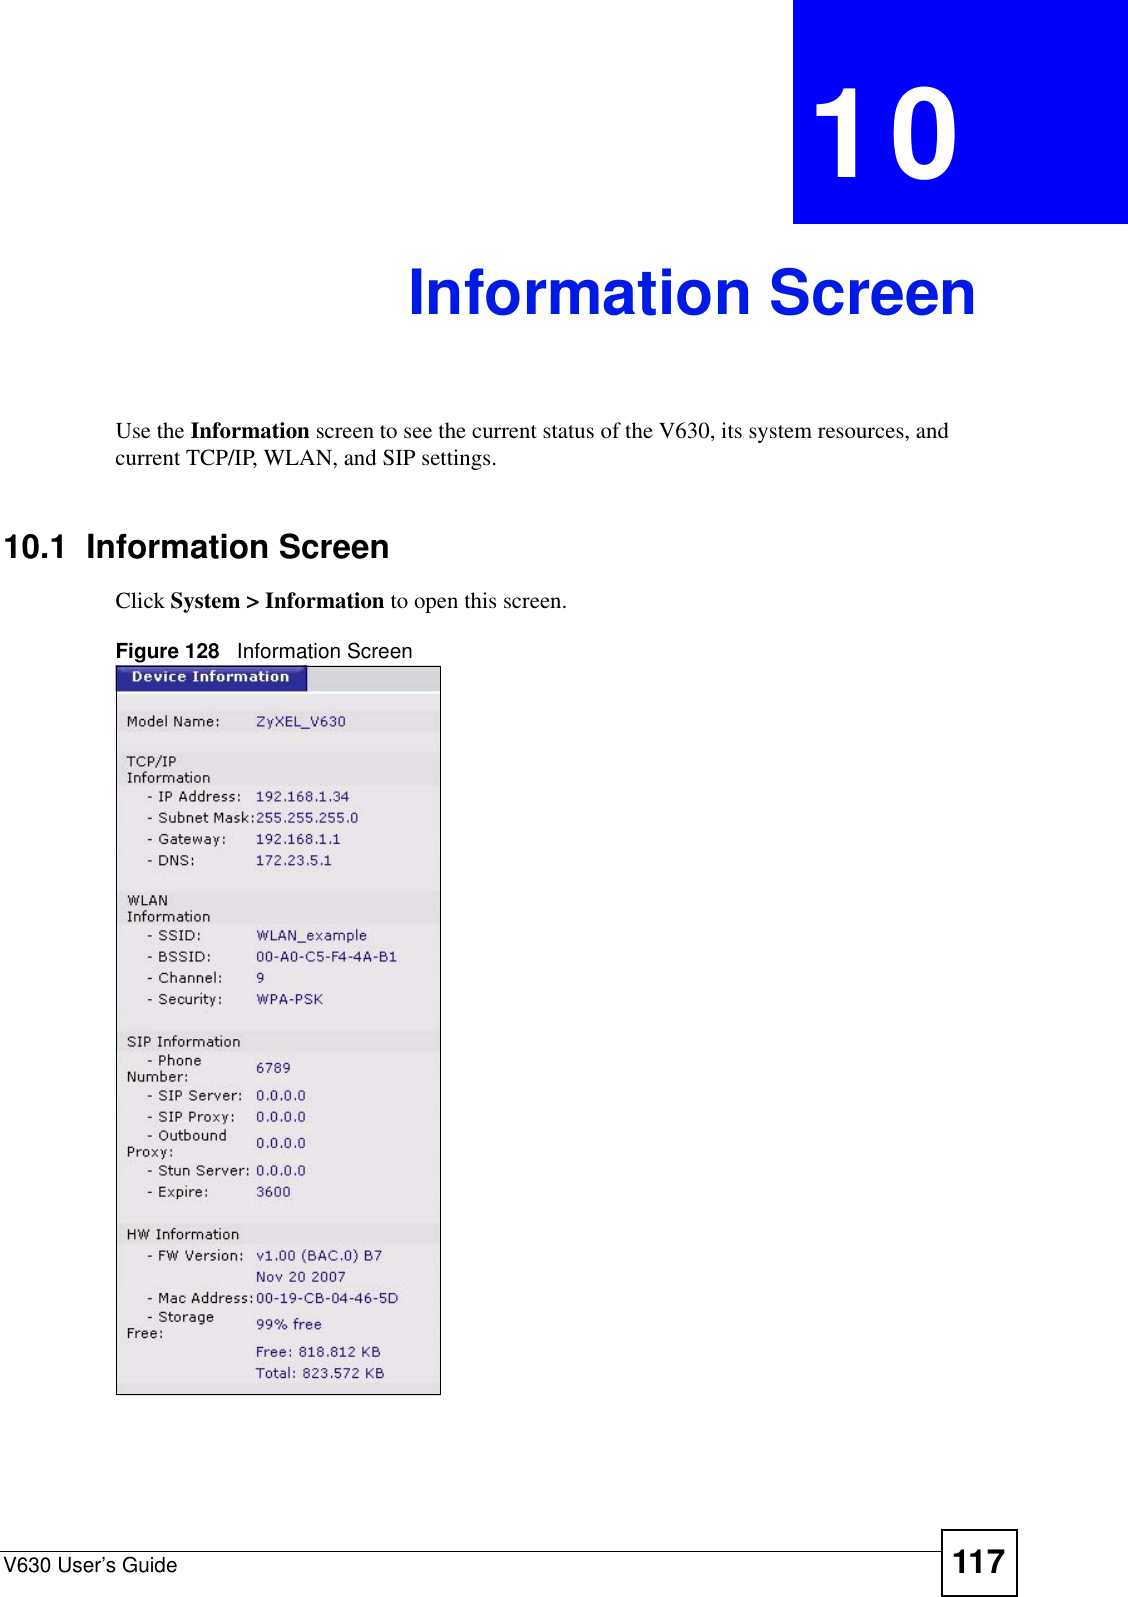 V630 User’s Guide 117CHAPTER  10 Information ScreenUse the Information screen to see the current status of the V630, its system resources, and current TCP/IP, WLAN, and SIP settings. 10.1  Information ScreenClick System &gt; Information to open this screen.Figure 128   Information Screen